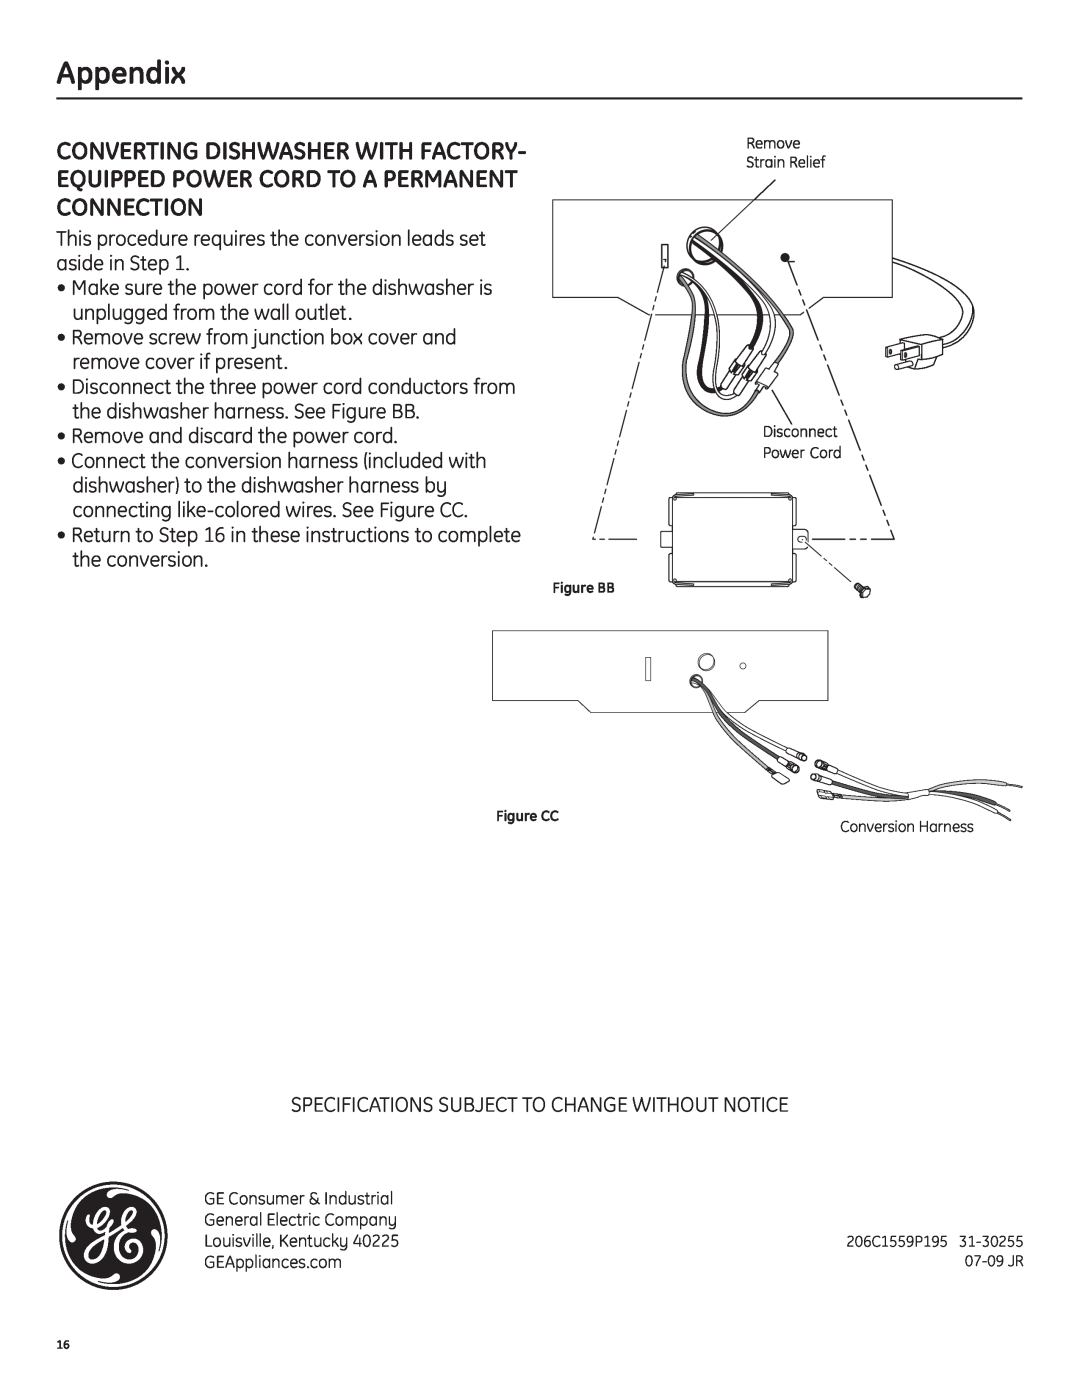 GE 206C1559P195 Appendix, Converting Dishwasher With Factory, Equipped Power Cord To A Permanent Connection 